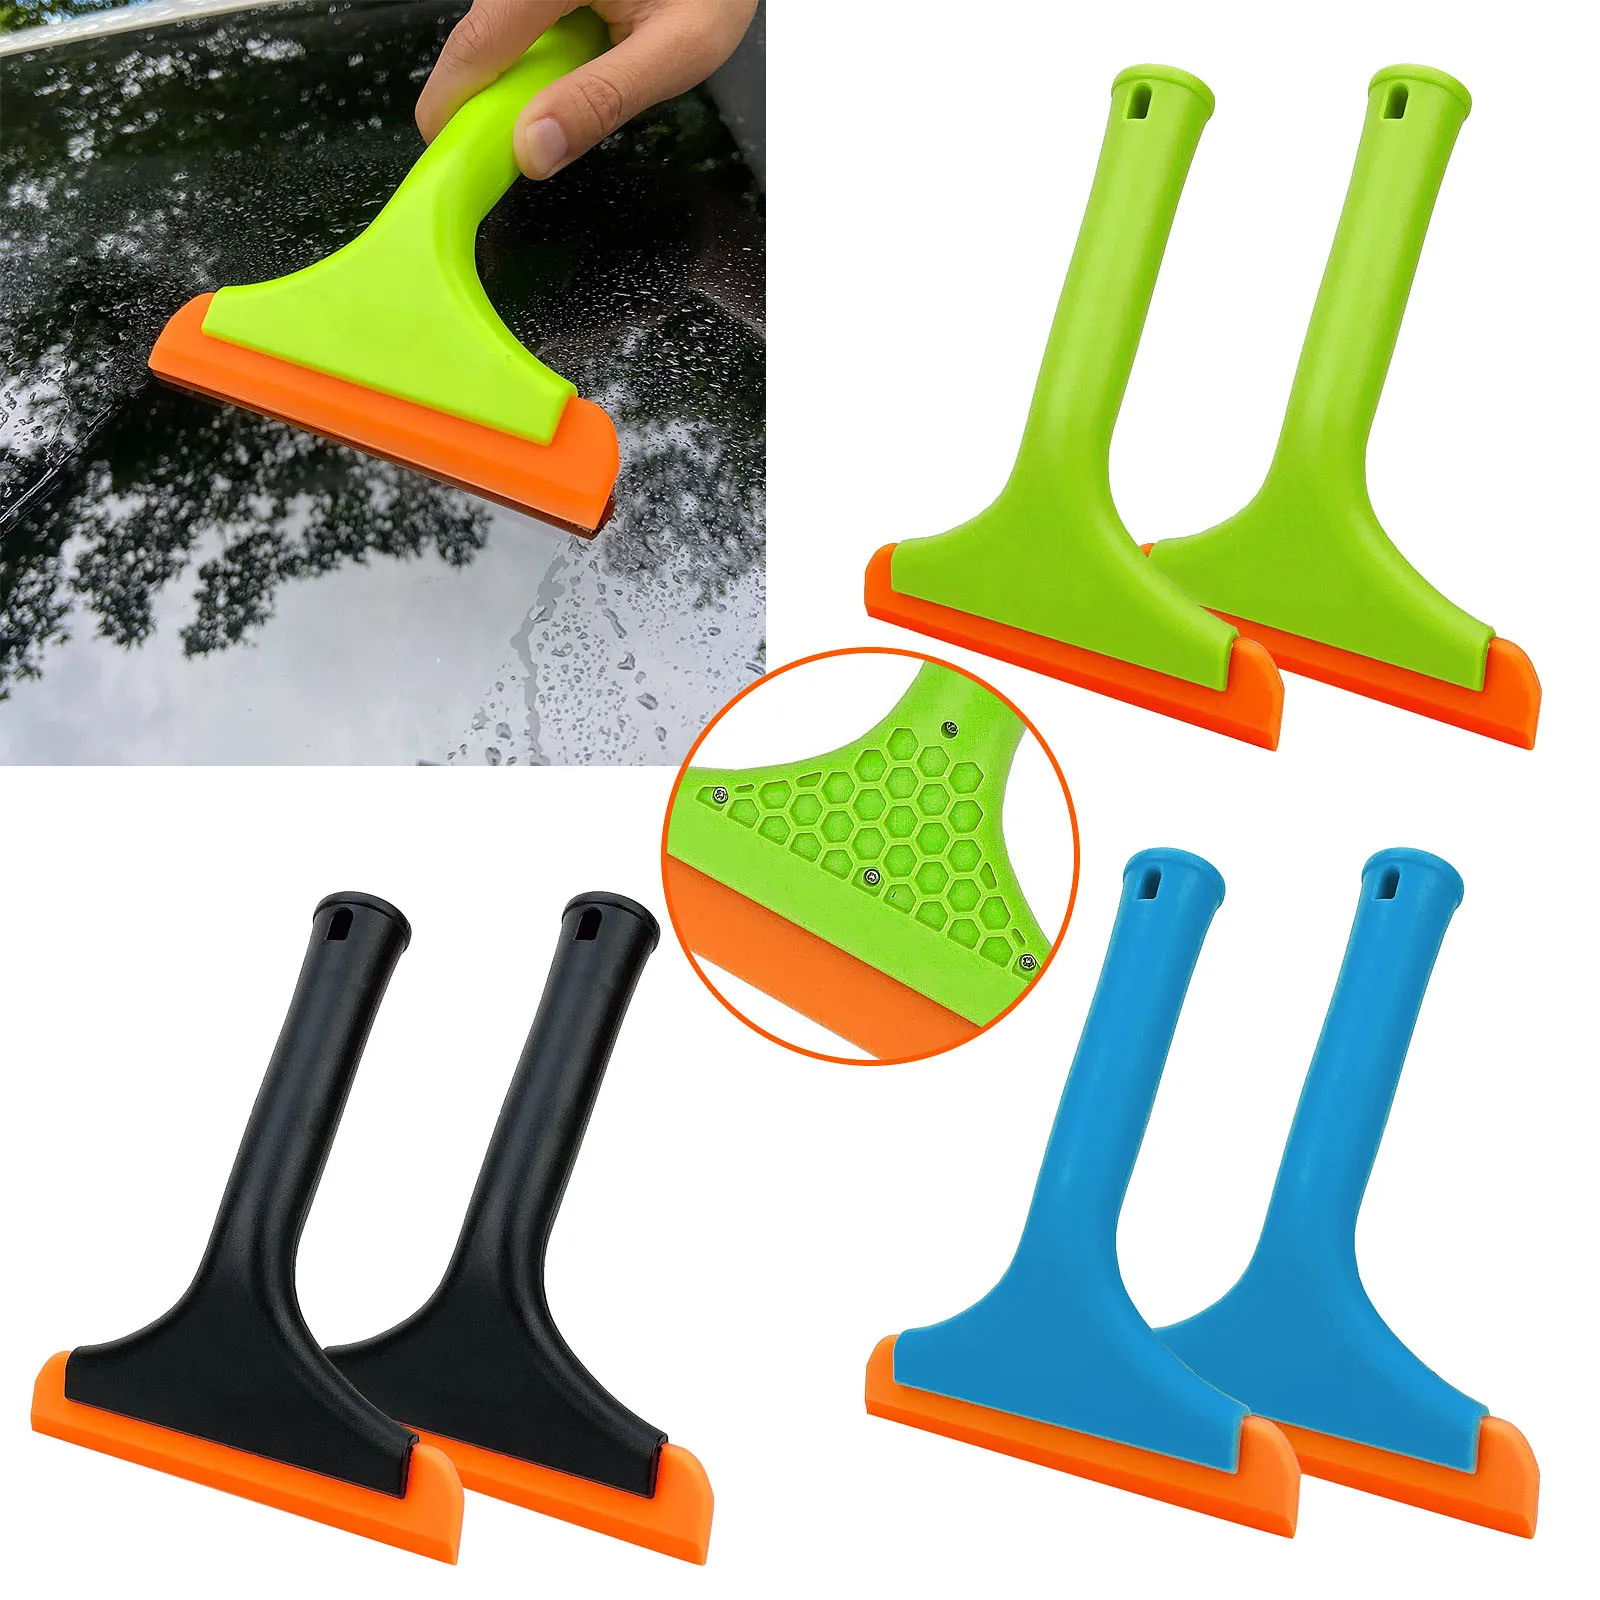 Tiny Bathroom Shower Mirror Squeegee with Hanging Hook, Silicone Mini  Kitchen Countertop Squeegee, Water Wiper Scraper Cleaner Tool for Cleaning  Sink